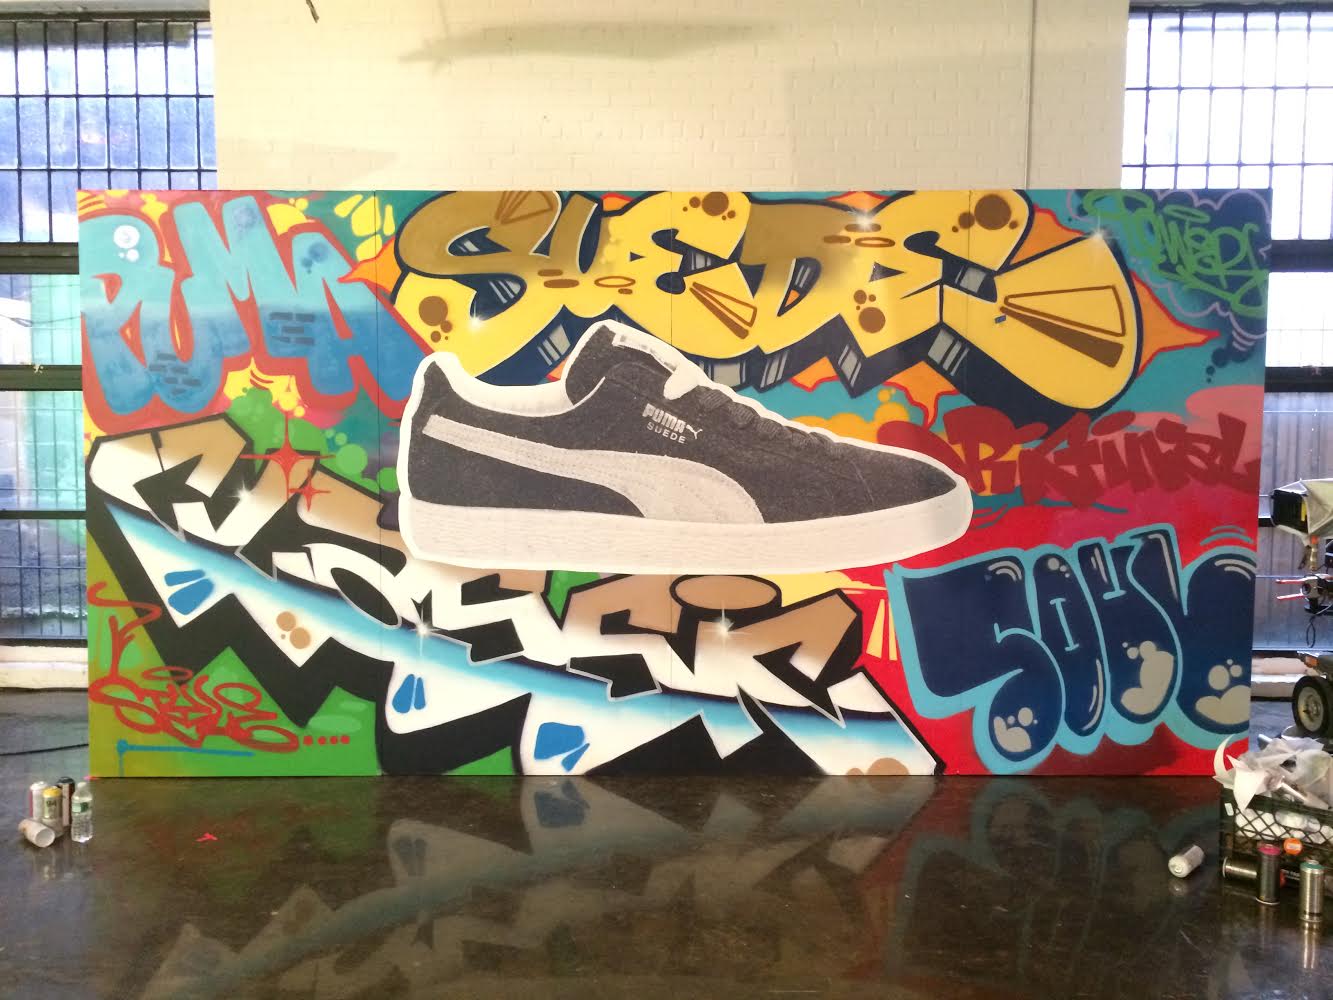 Graffiti Artist Commercial Shoot for NYC Puma Suede Street Art Campaign